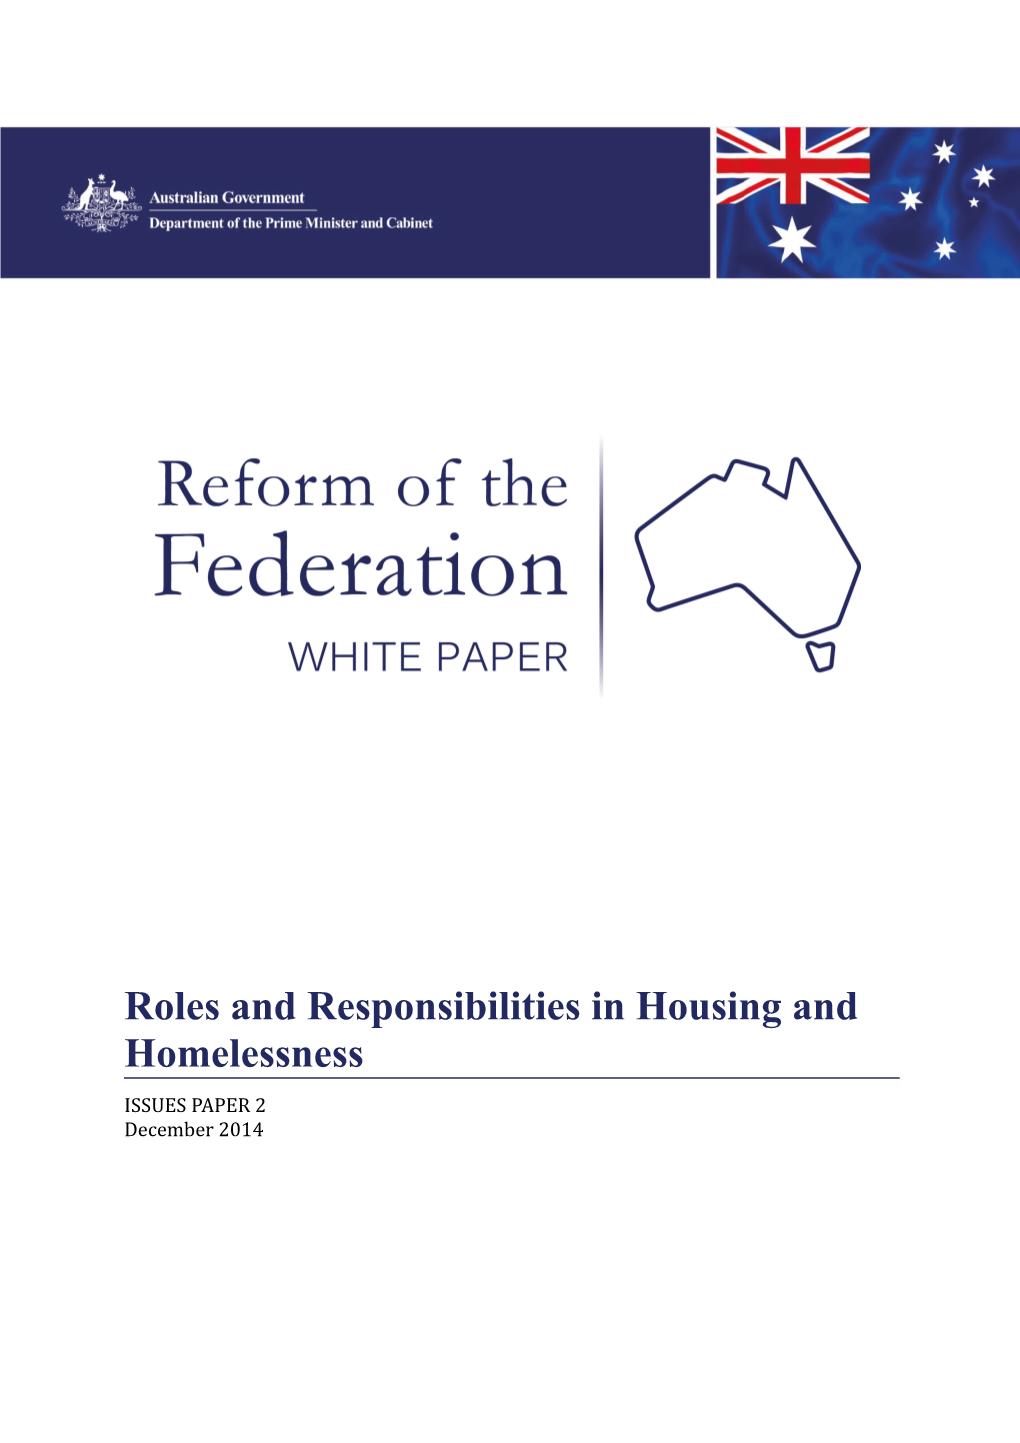 Roles and Responsibilities in Housing and Homelessness